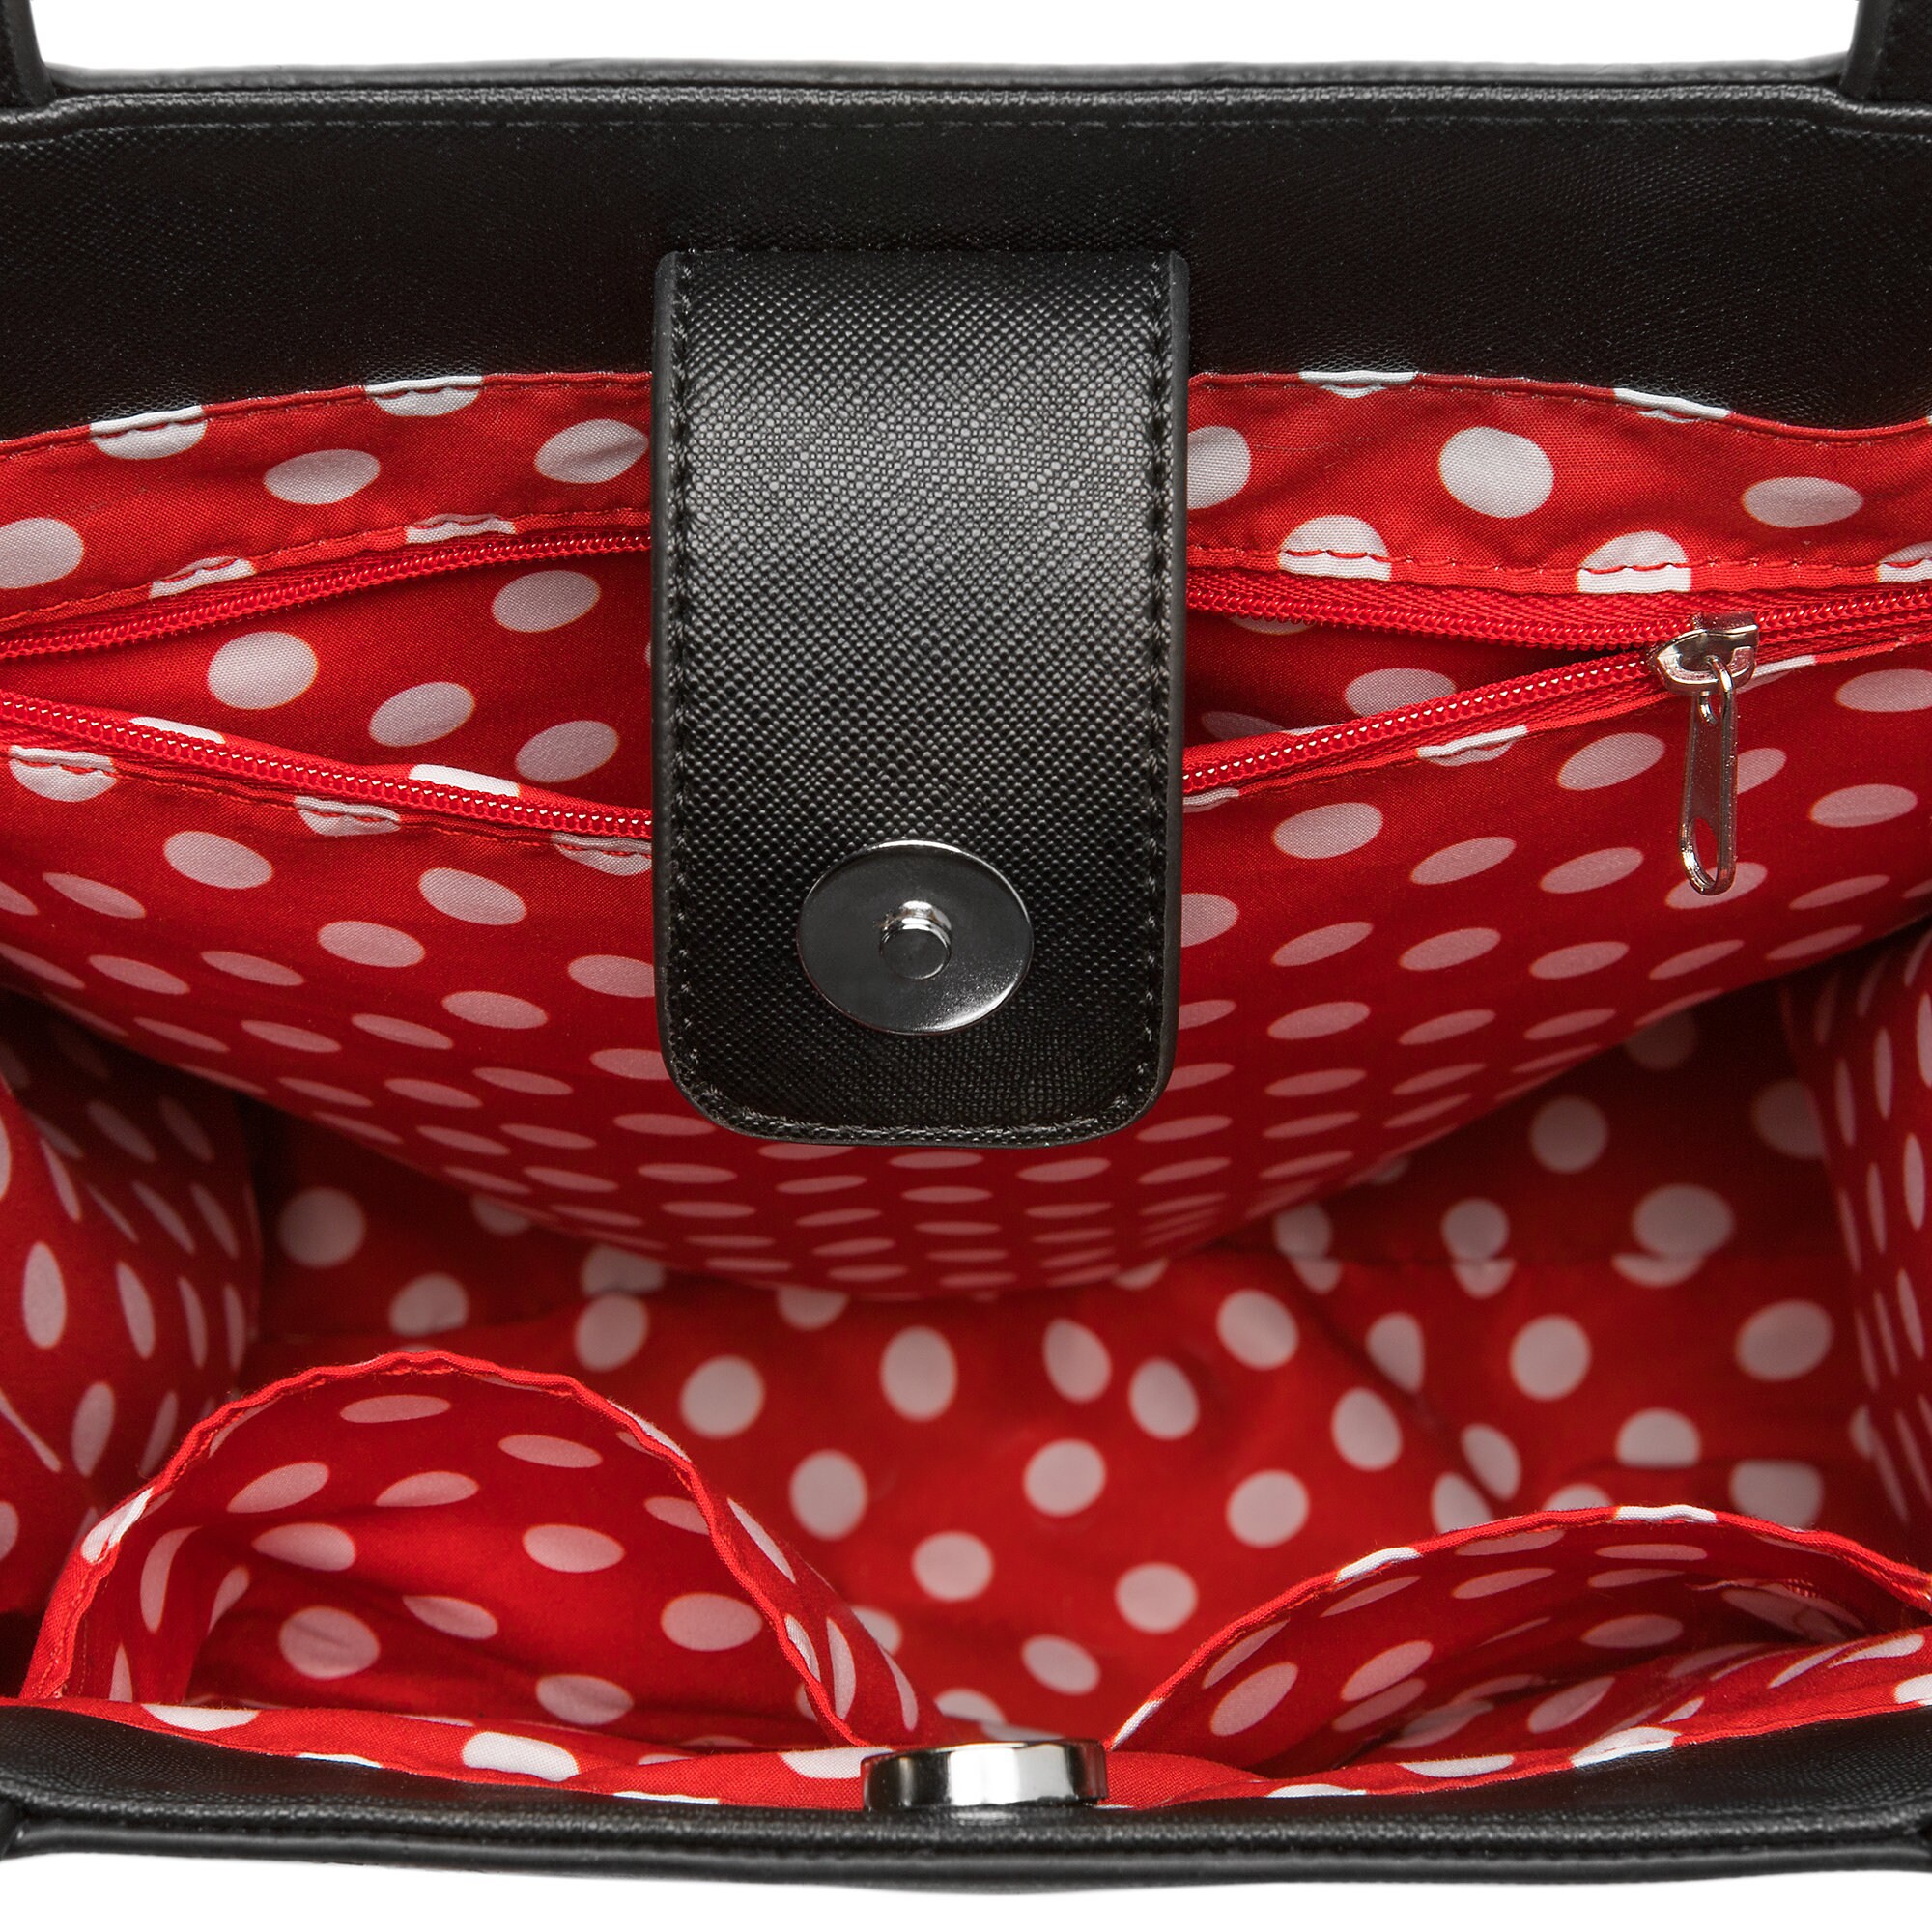 Minnie Mouse Sequined Bow Tote